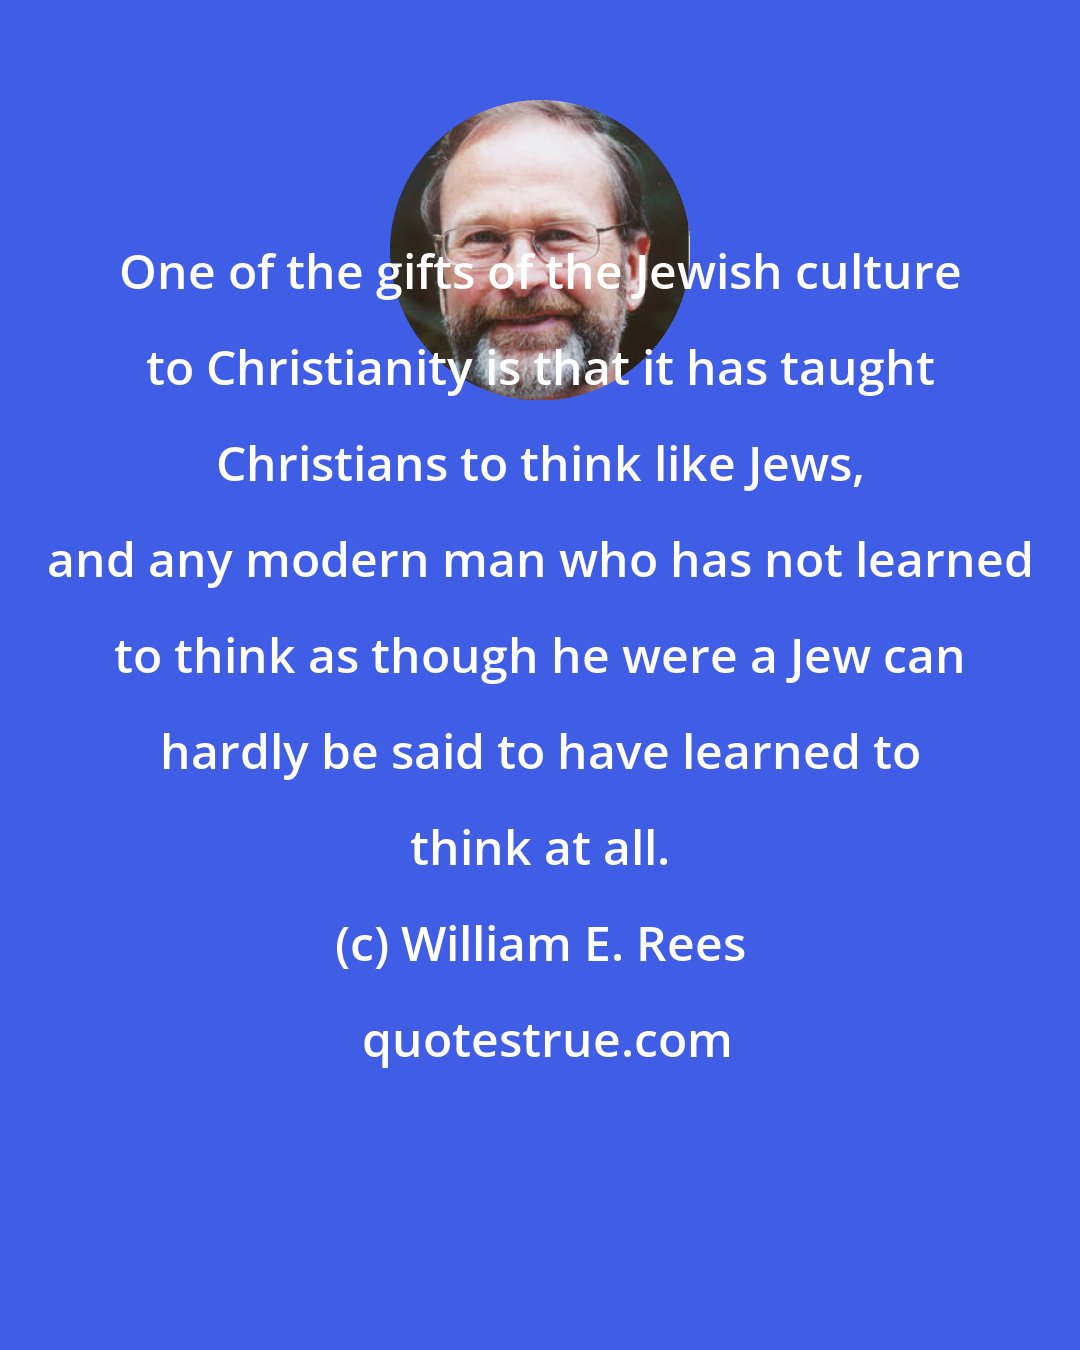 William E. Rees: One of the gifts of the Jewish culture to Christianity is that it has taught Christians to think like Jews, and any modern man who has not learned to think as though he were a Jew can hardly be said to have learned to think at all.